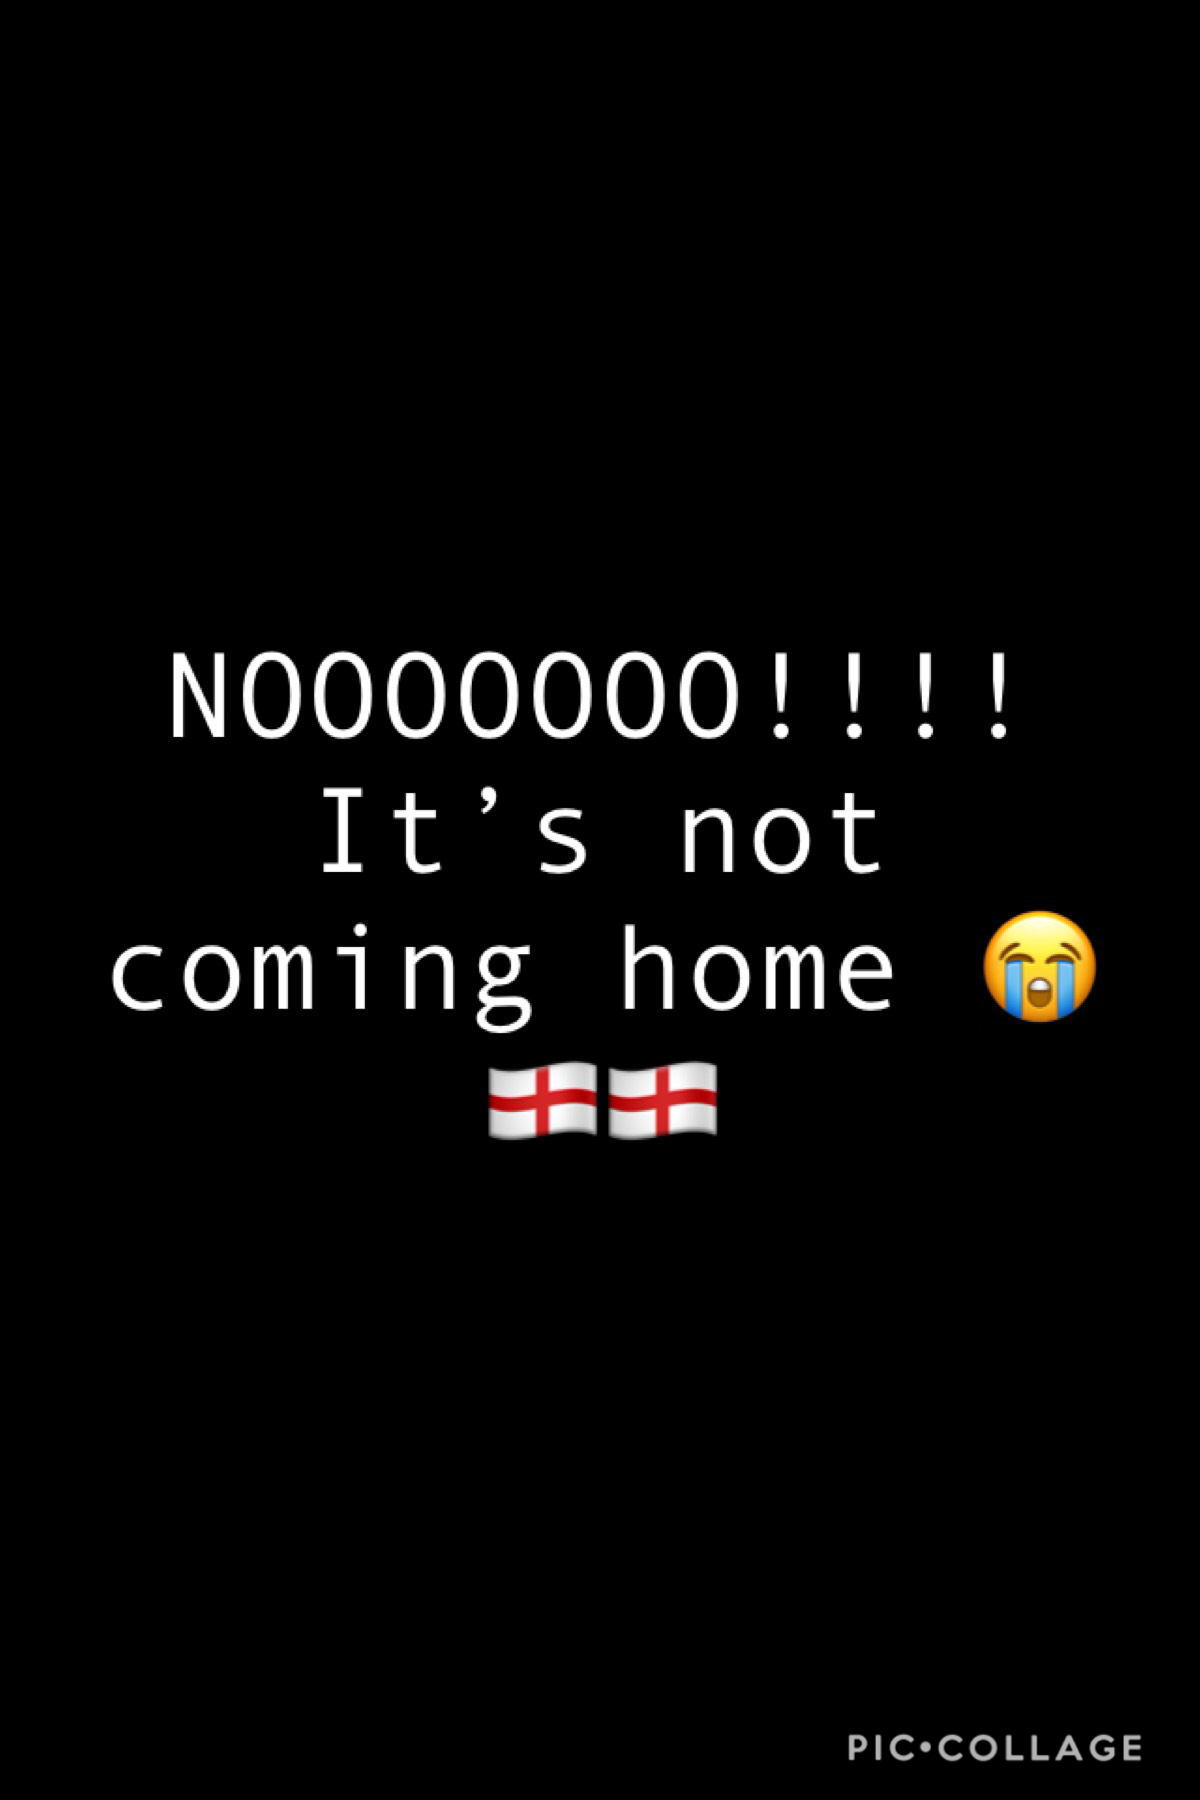 They played so well 😔😭🏴󠁧󠁢󠁥󠁮󠁧󠁿